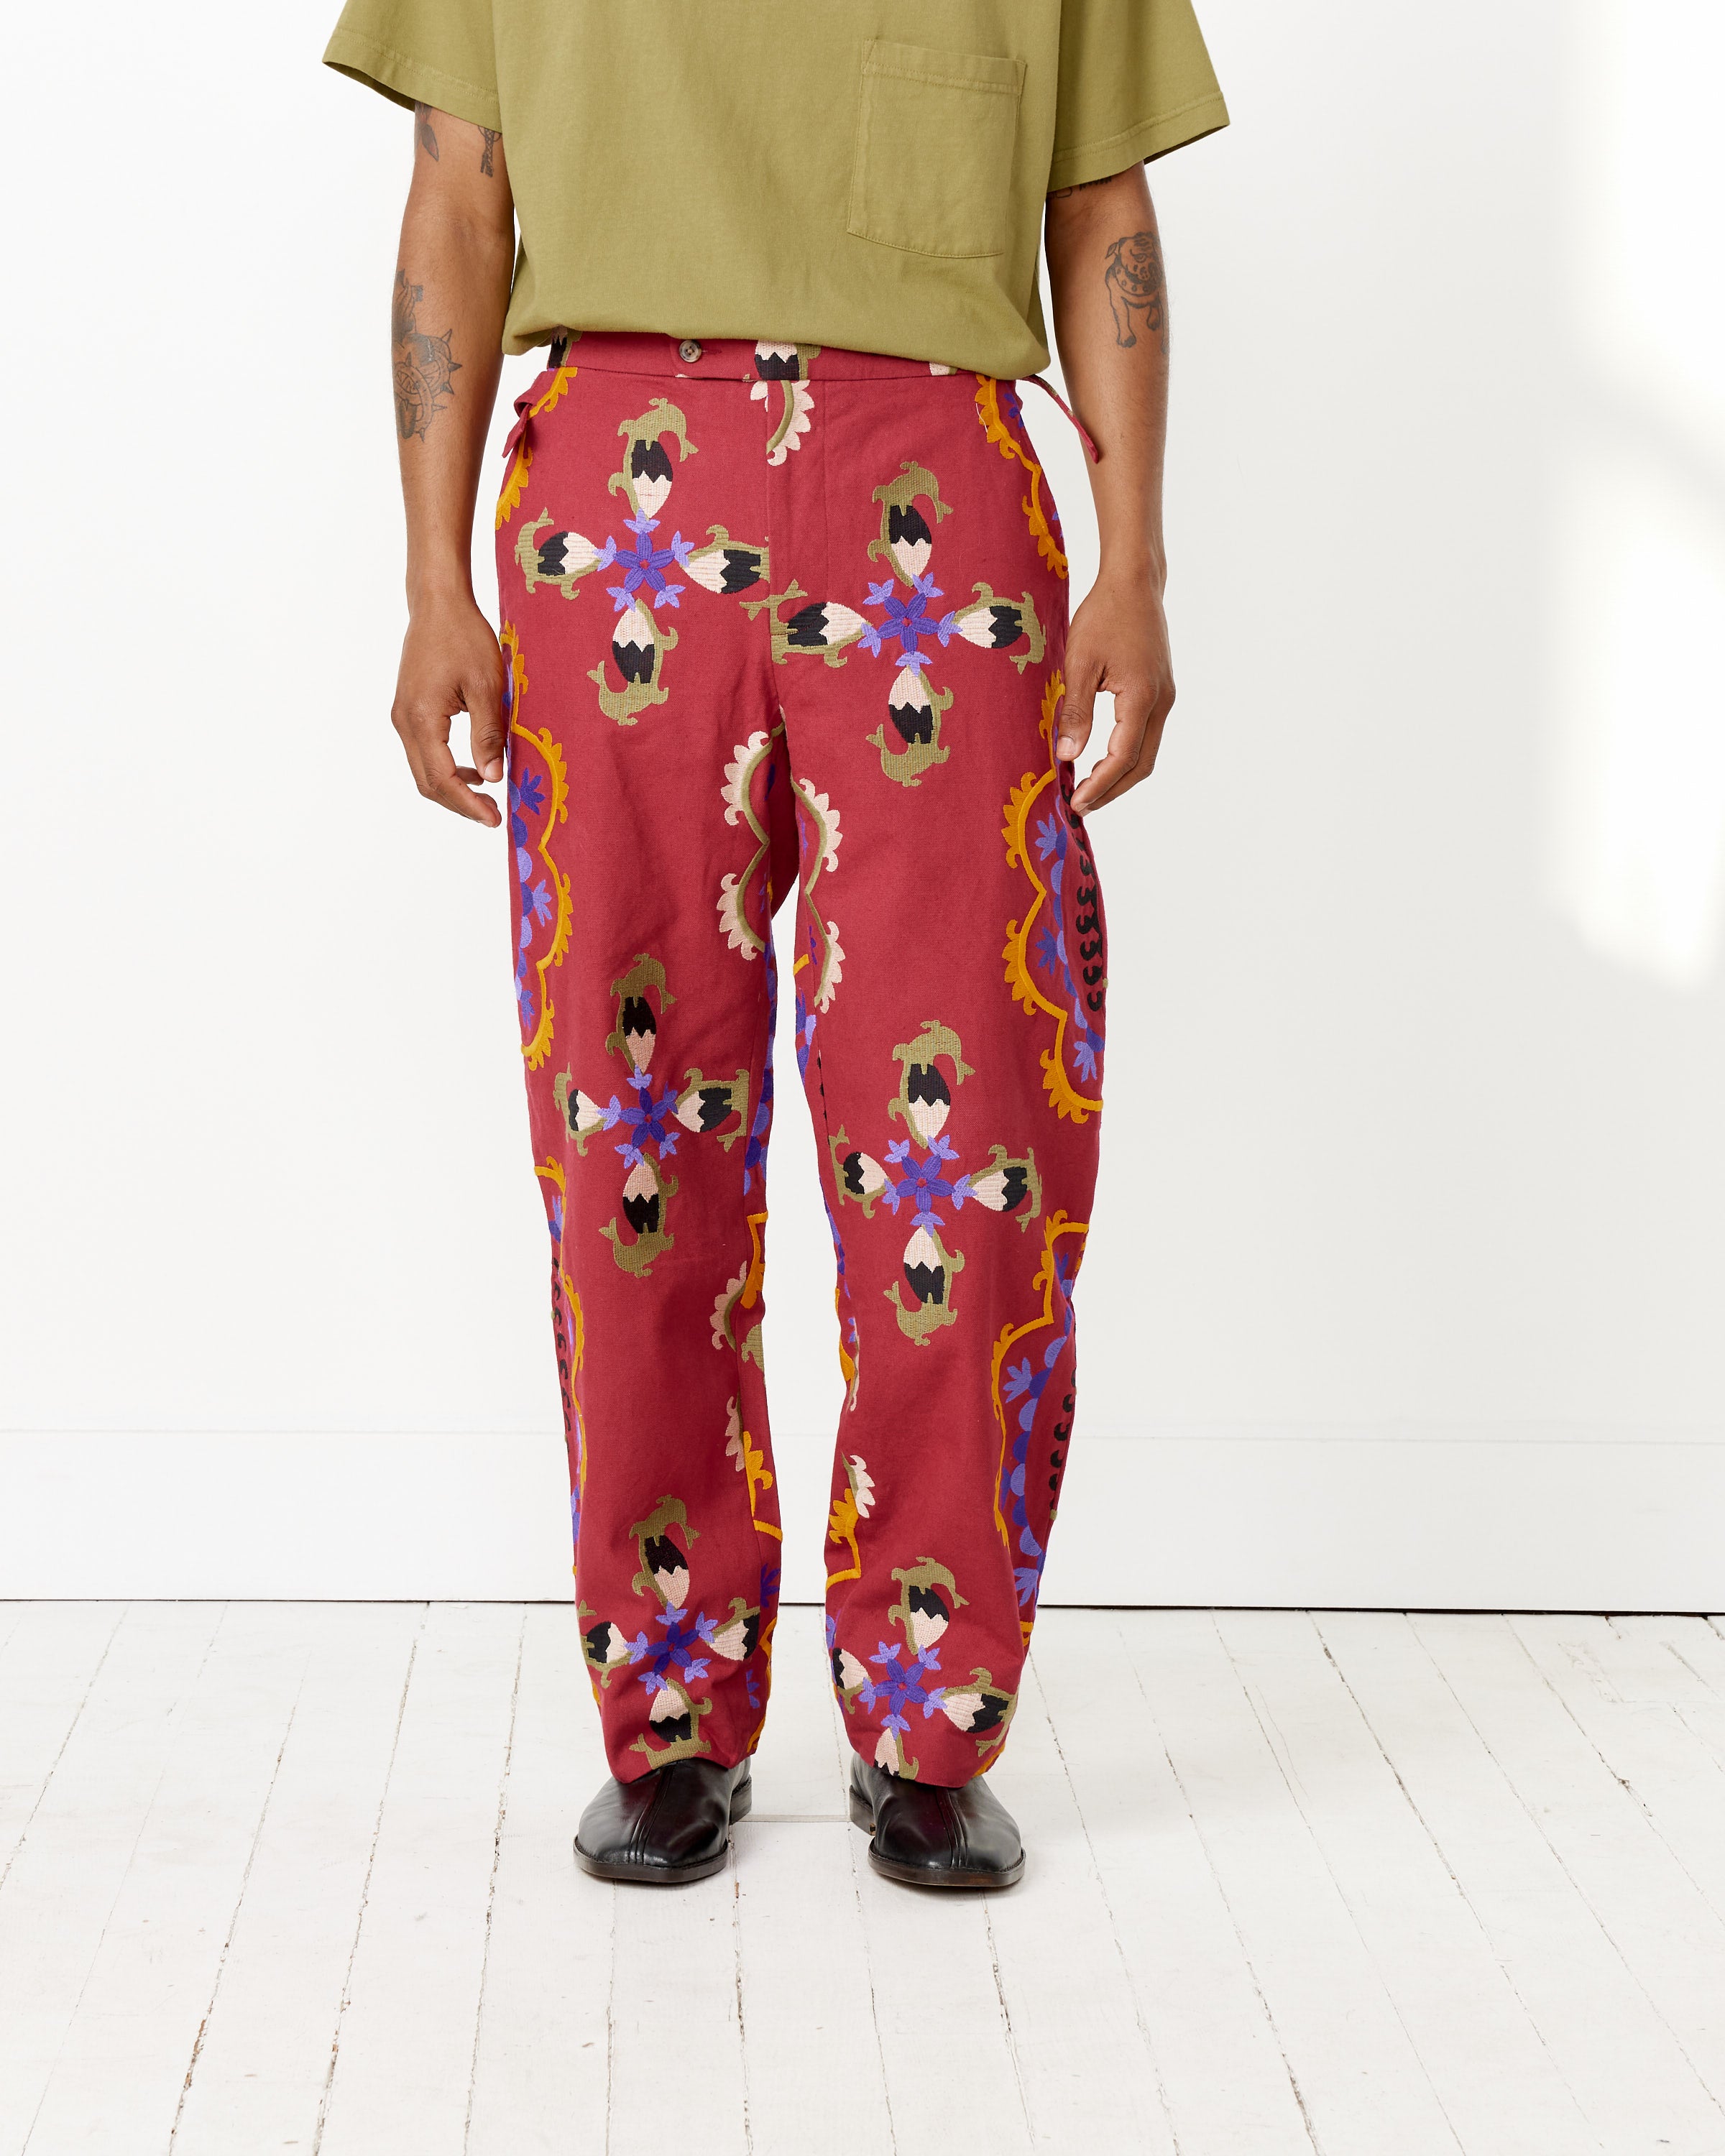 Store Embroidery – General Trousers Suzani Mohawk